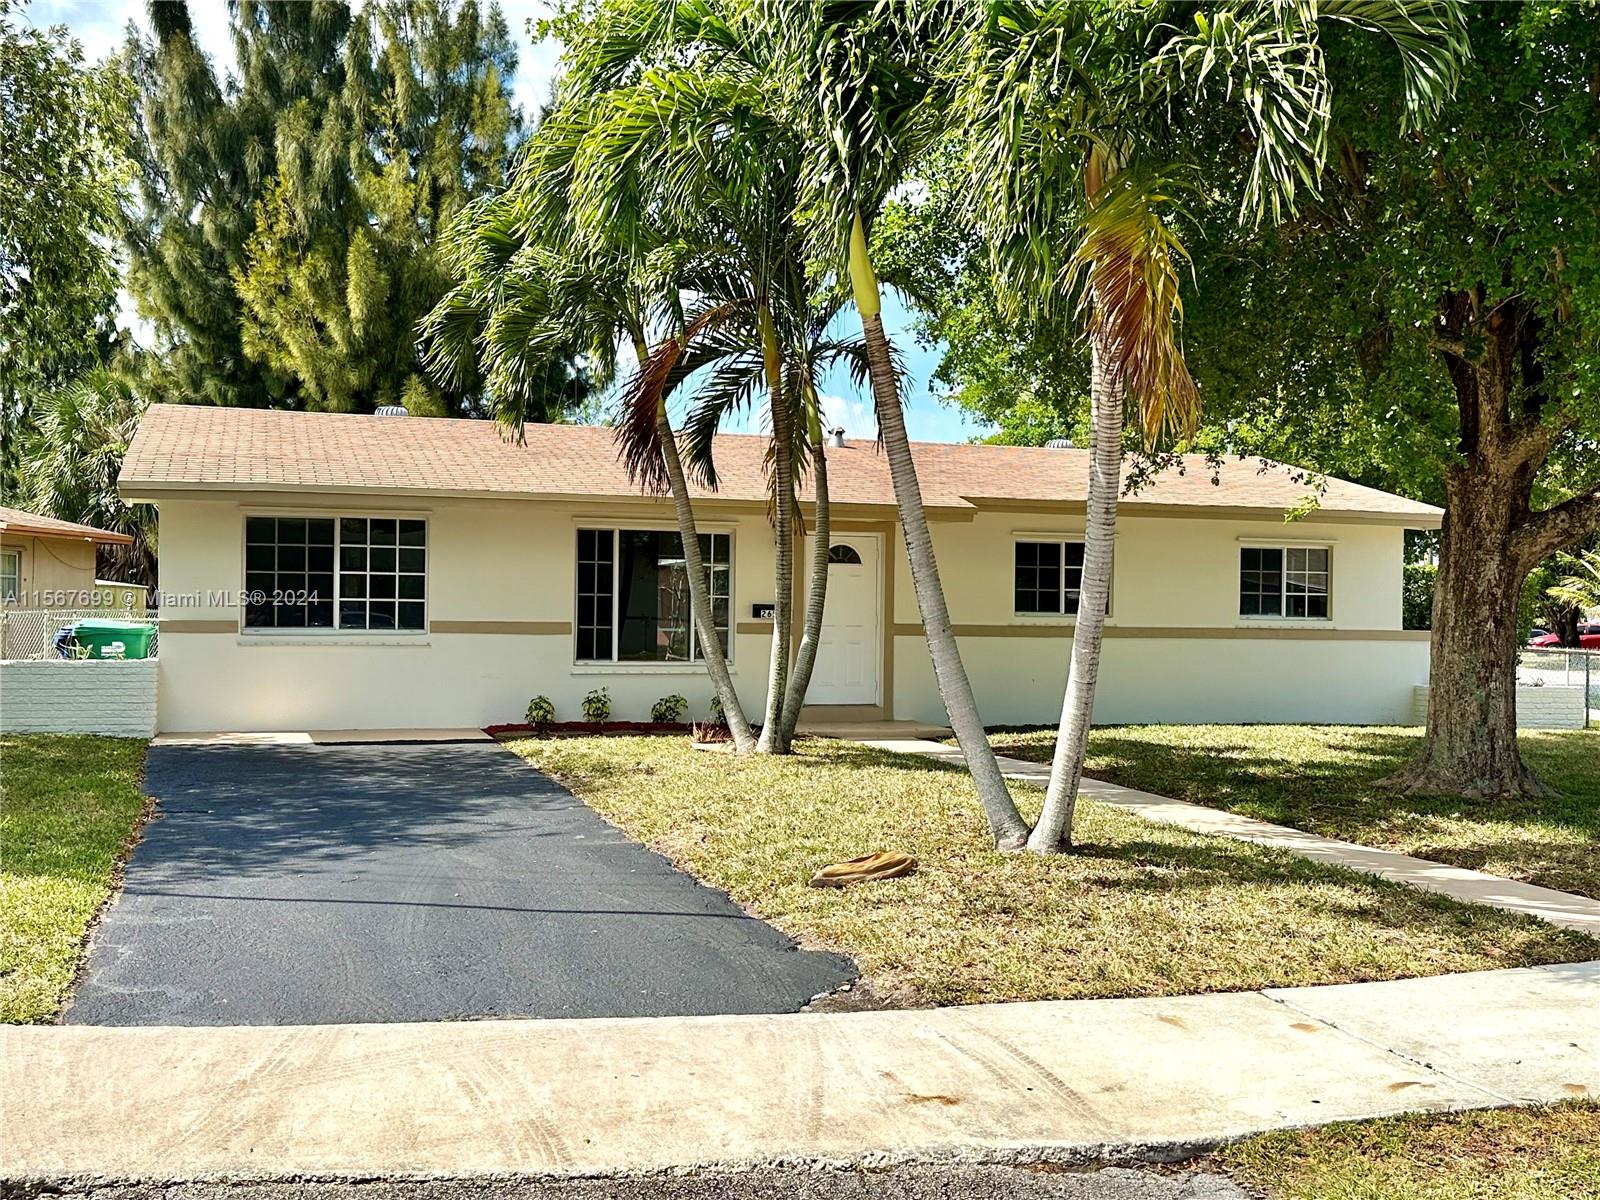 Property for Sale at 265 Nw 203rd Ter Ter, Miami Gardens, Broward County, Florida - Bedrooms: 4 
Bathrooms: 2  - $559,000